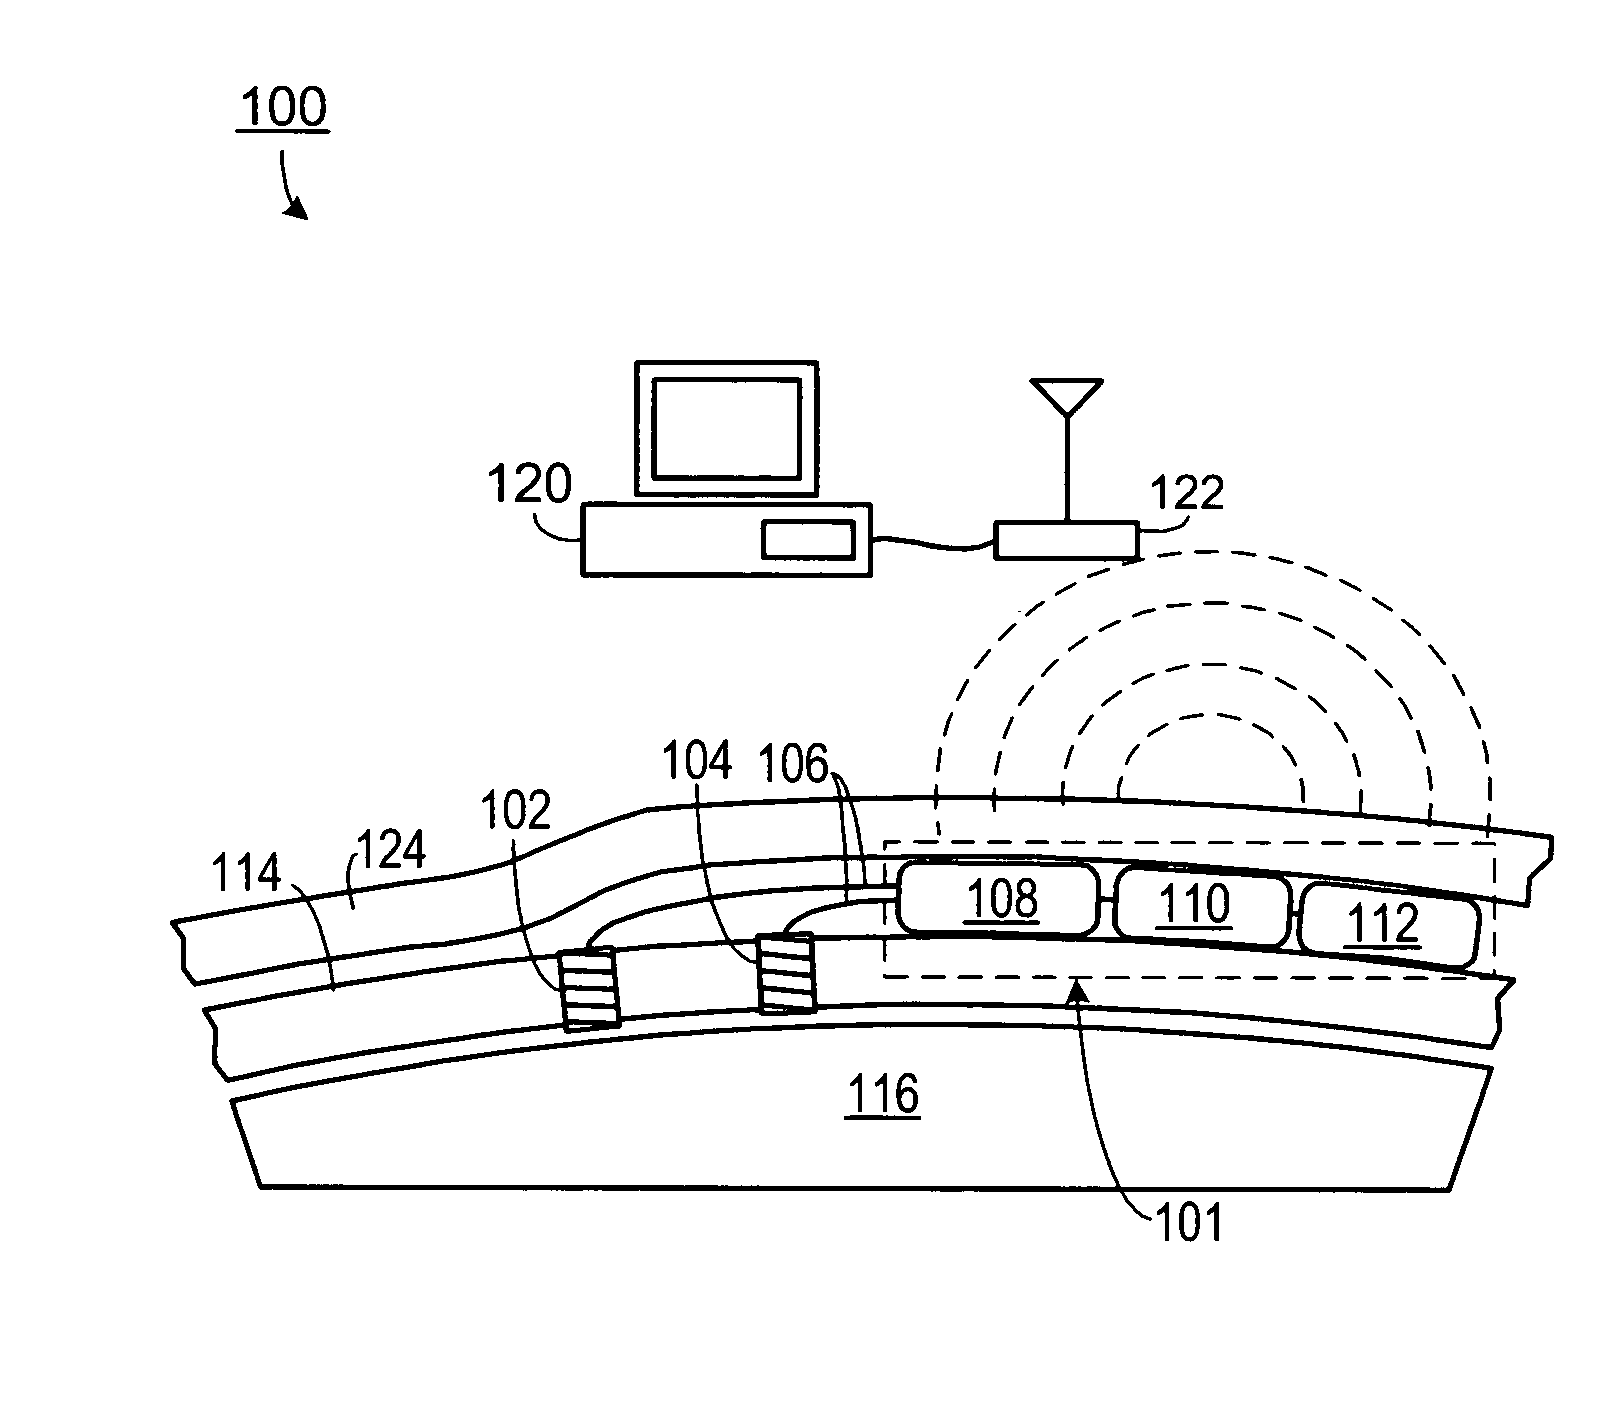 Apparatus and method for detecting neural signals and using neural signals to drive external functions